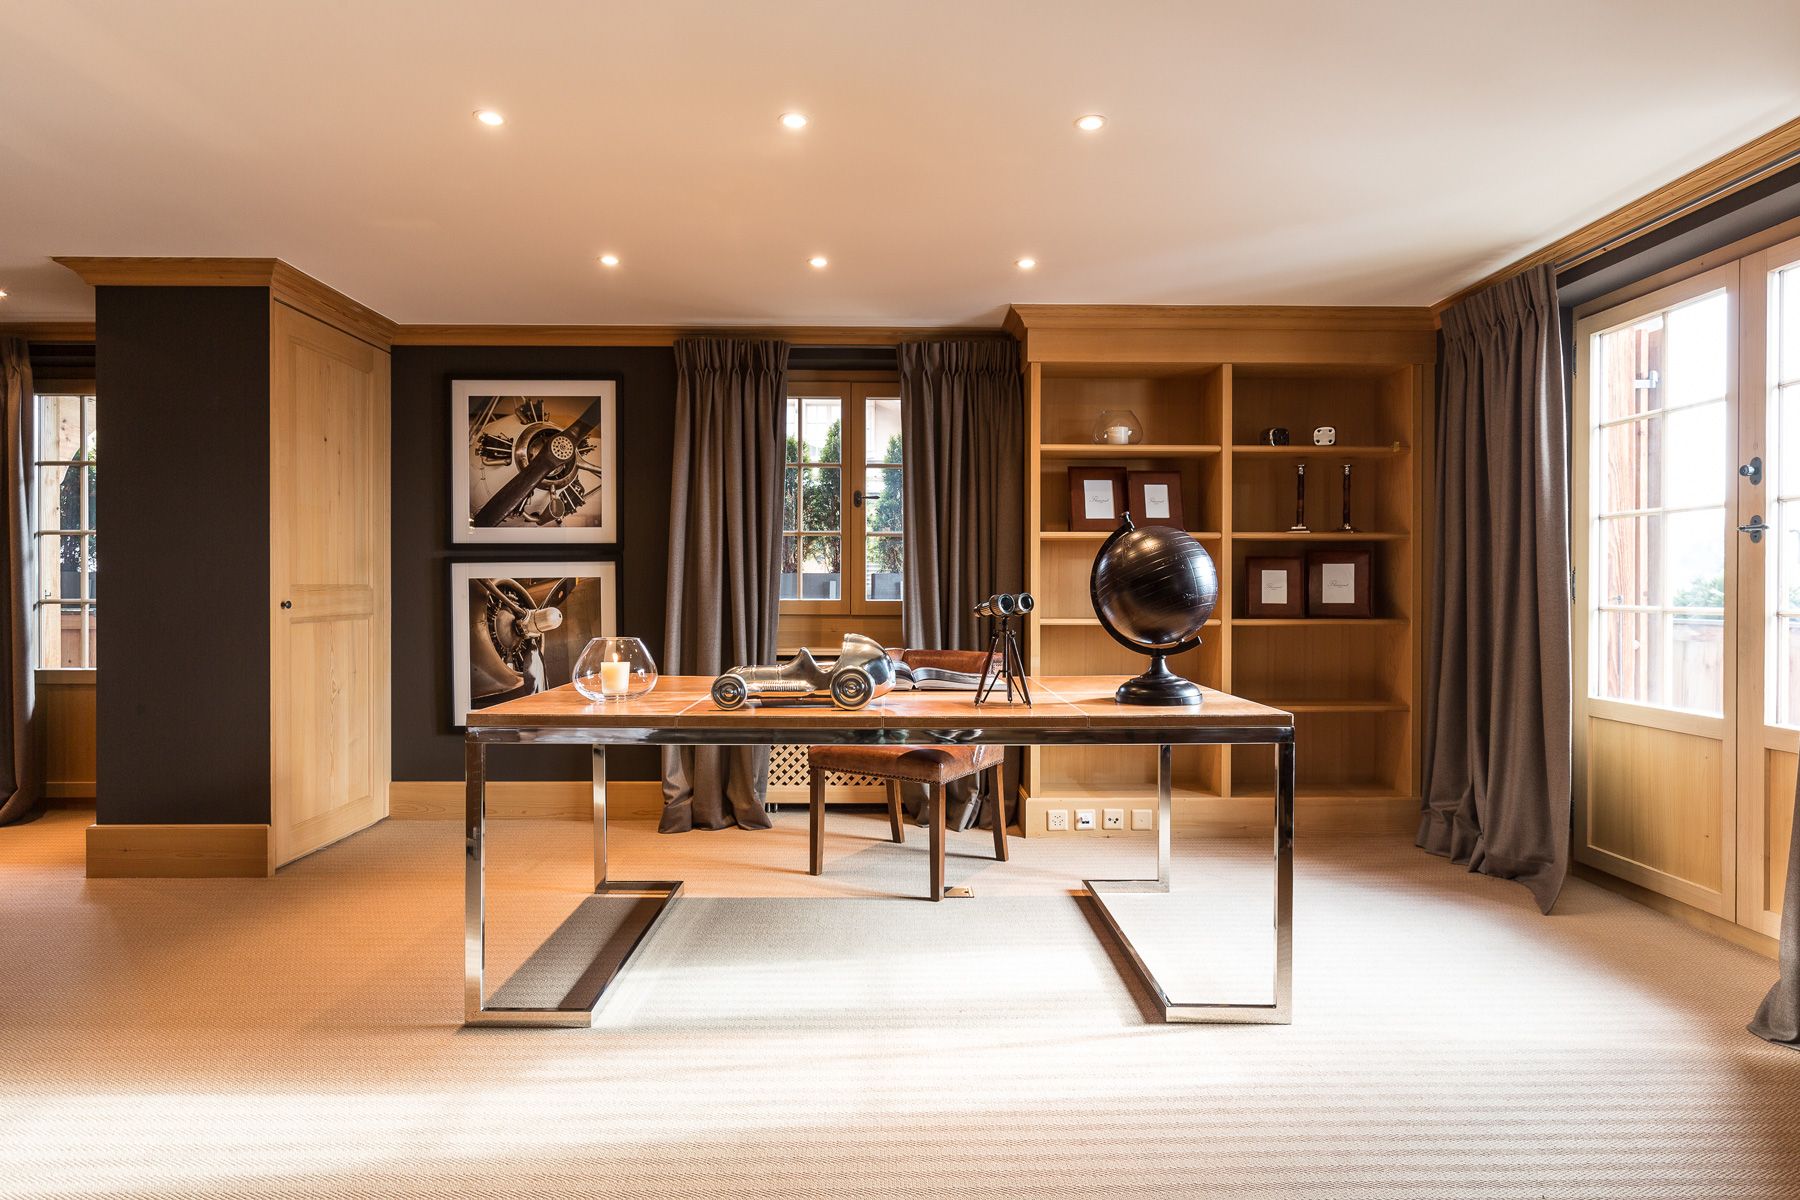 Get To Know Rougemont Interiors And The Beauty Of Their Projects